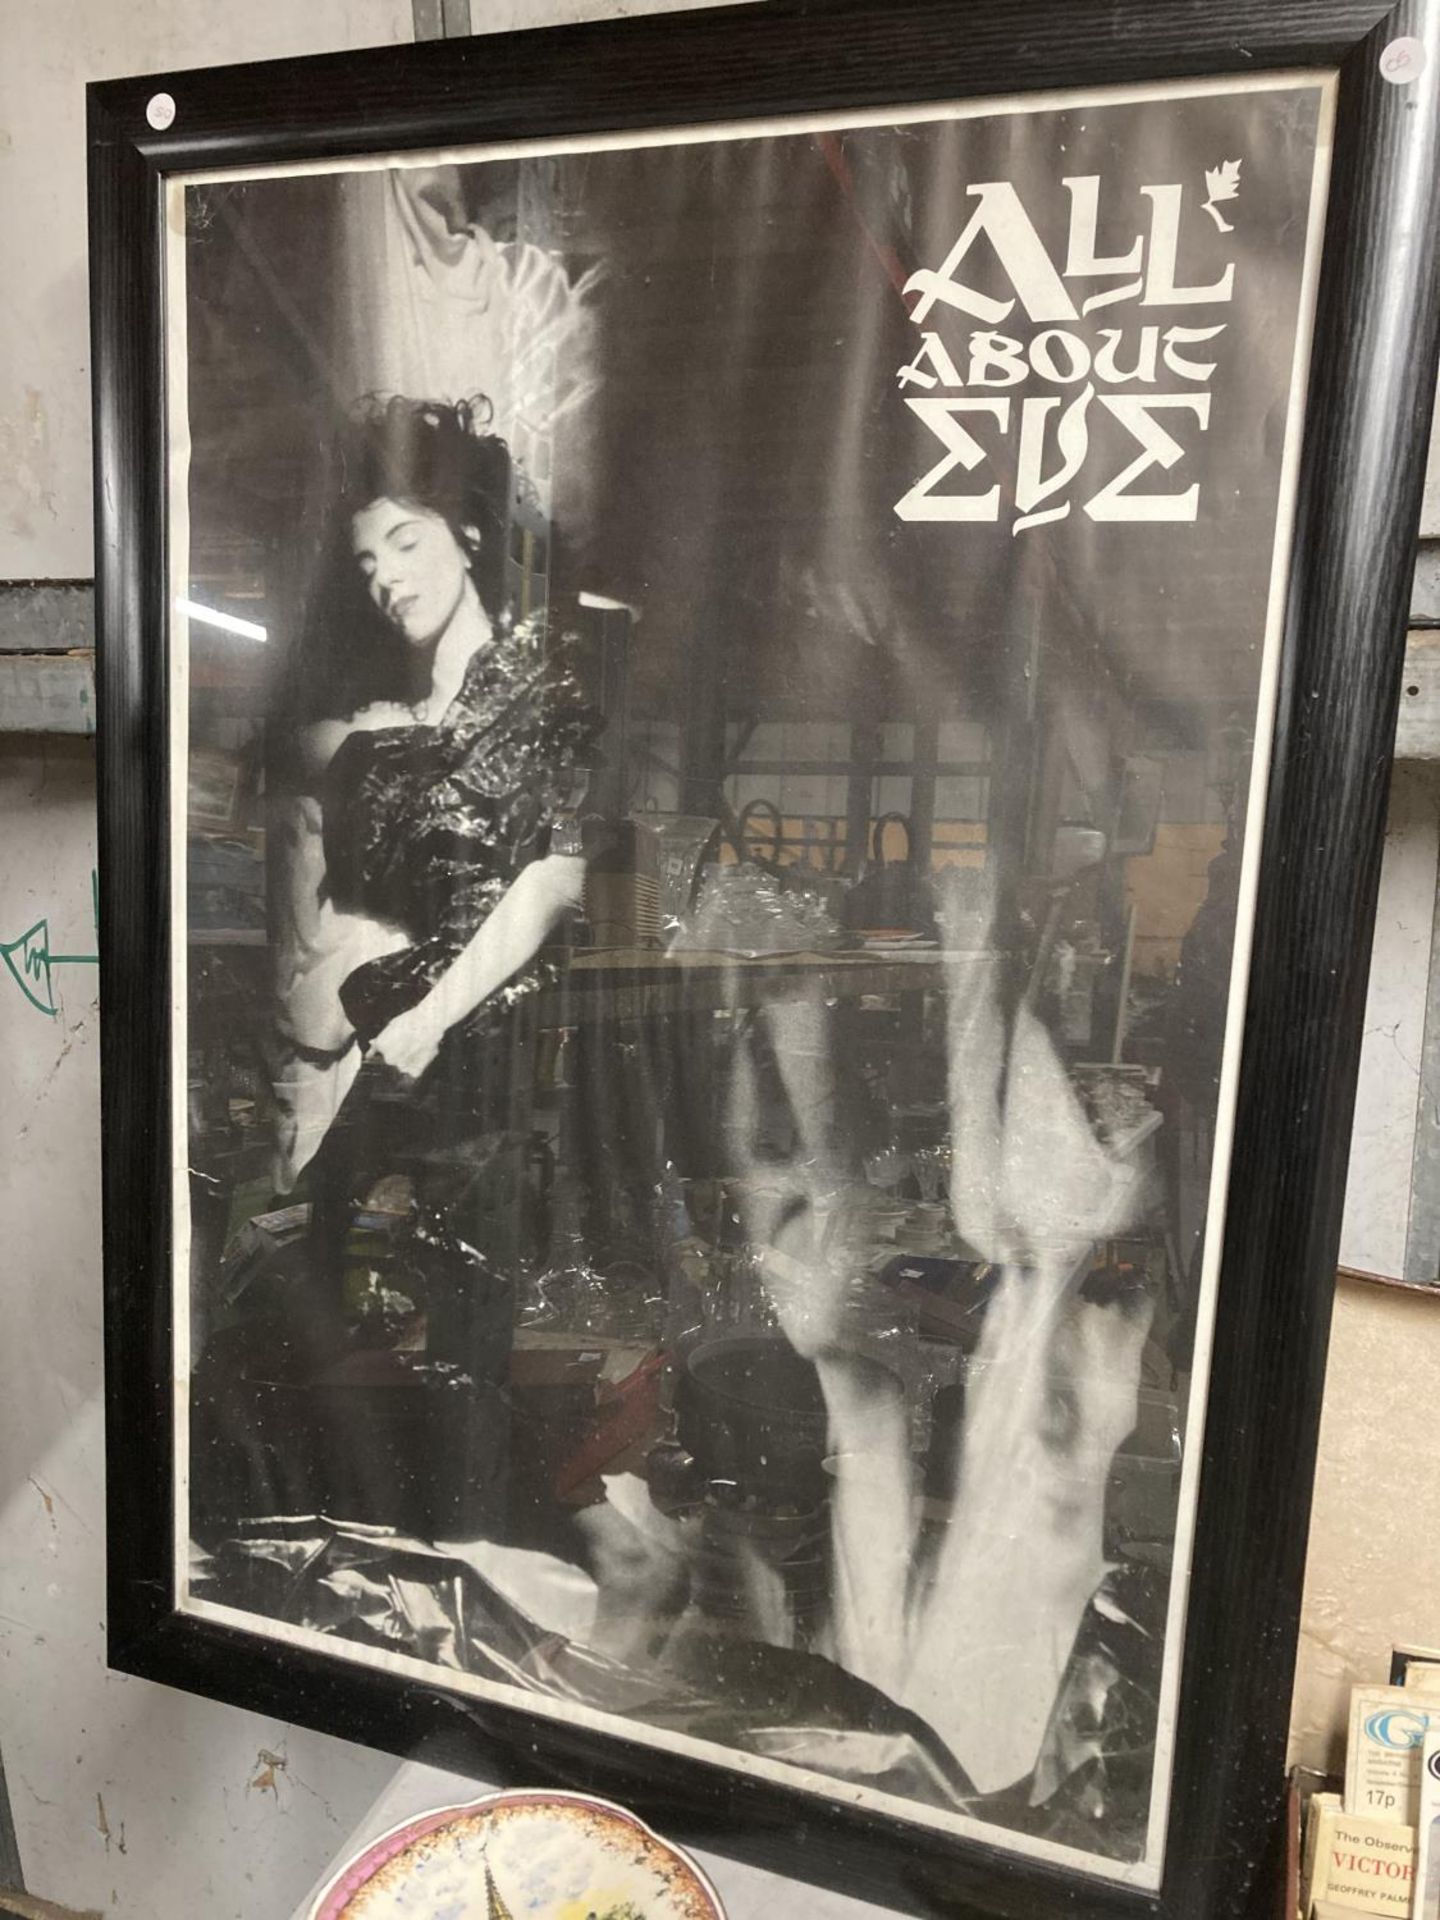 A LARGE FRAMED PROMOTION POSTER FOR POP GROUP 'ALL ABOUT EVE'